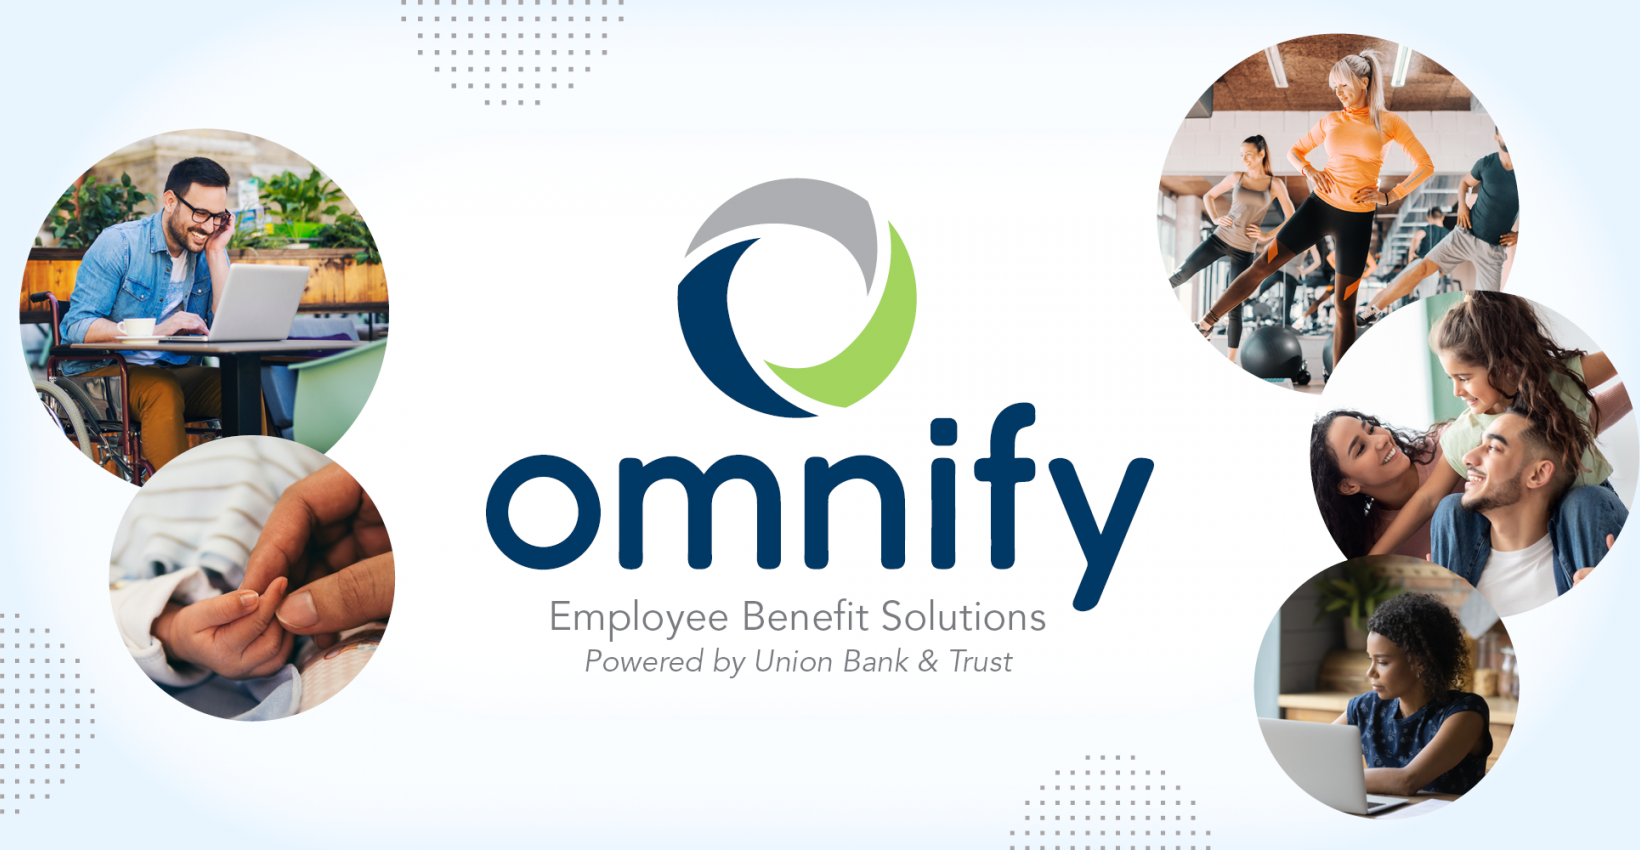 Omnify employee benefit solutions